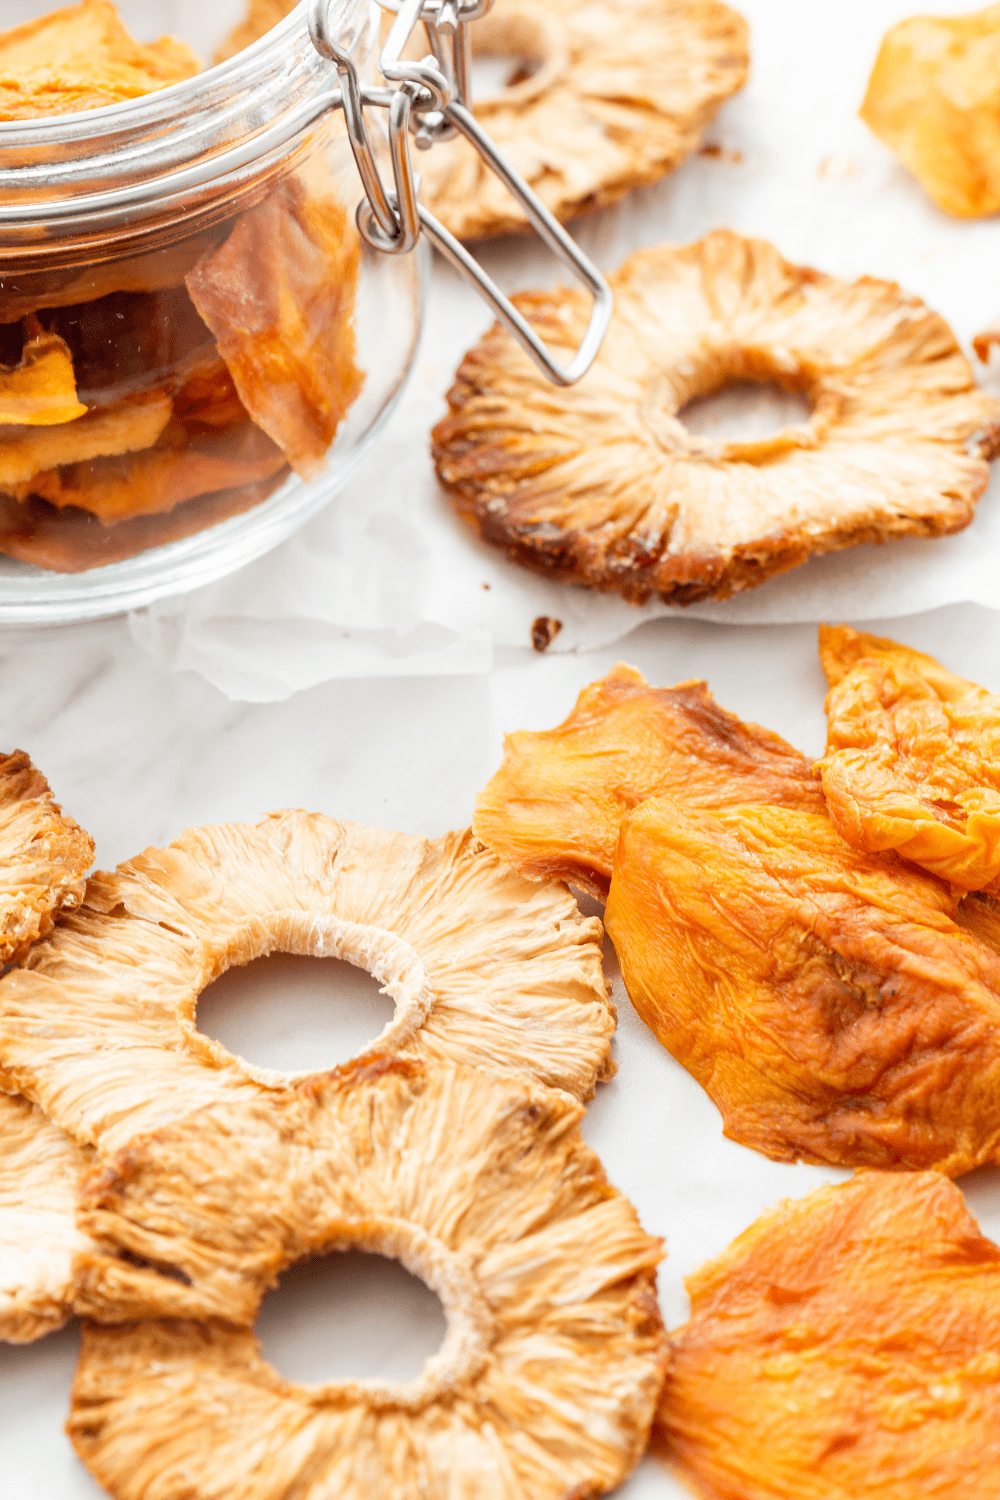 how long does it take to dehydrate fruit in an air fryer